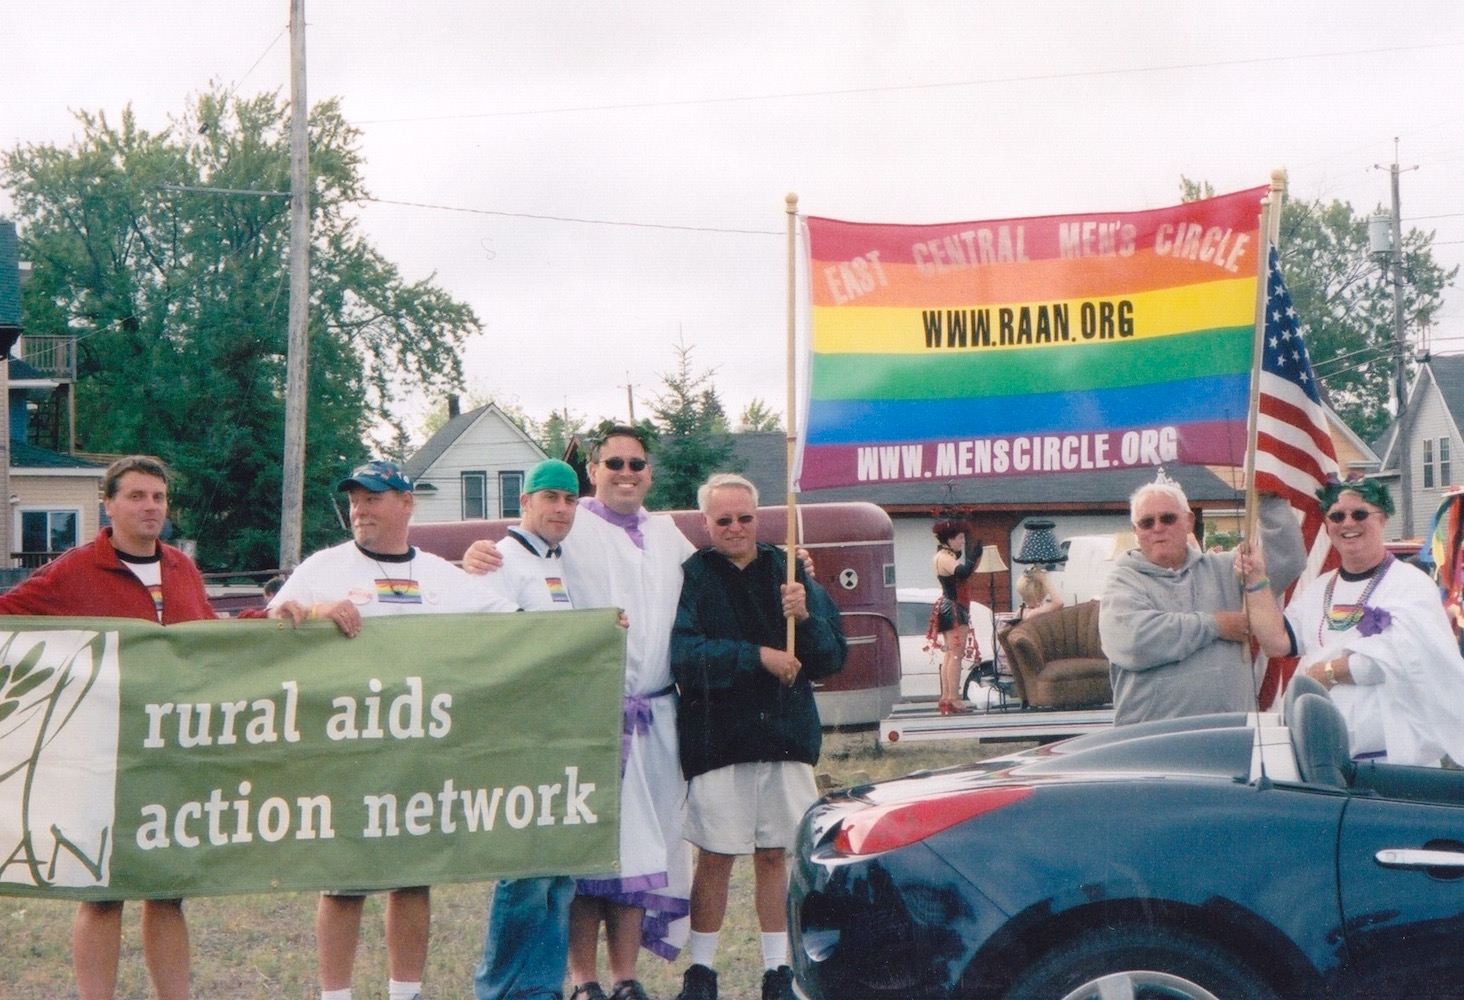 Don participating in the Duluth Superior Pride parade, supporting RAAN [Rural AIDS Action Network] and East Central Mens Circle, Duluth, MN, 2006. Photo courtesy of Don Quaintance. 	